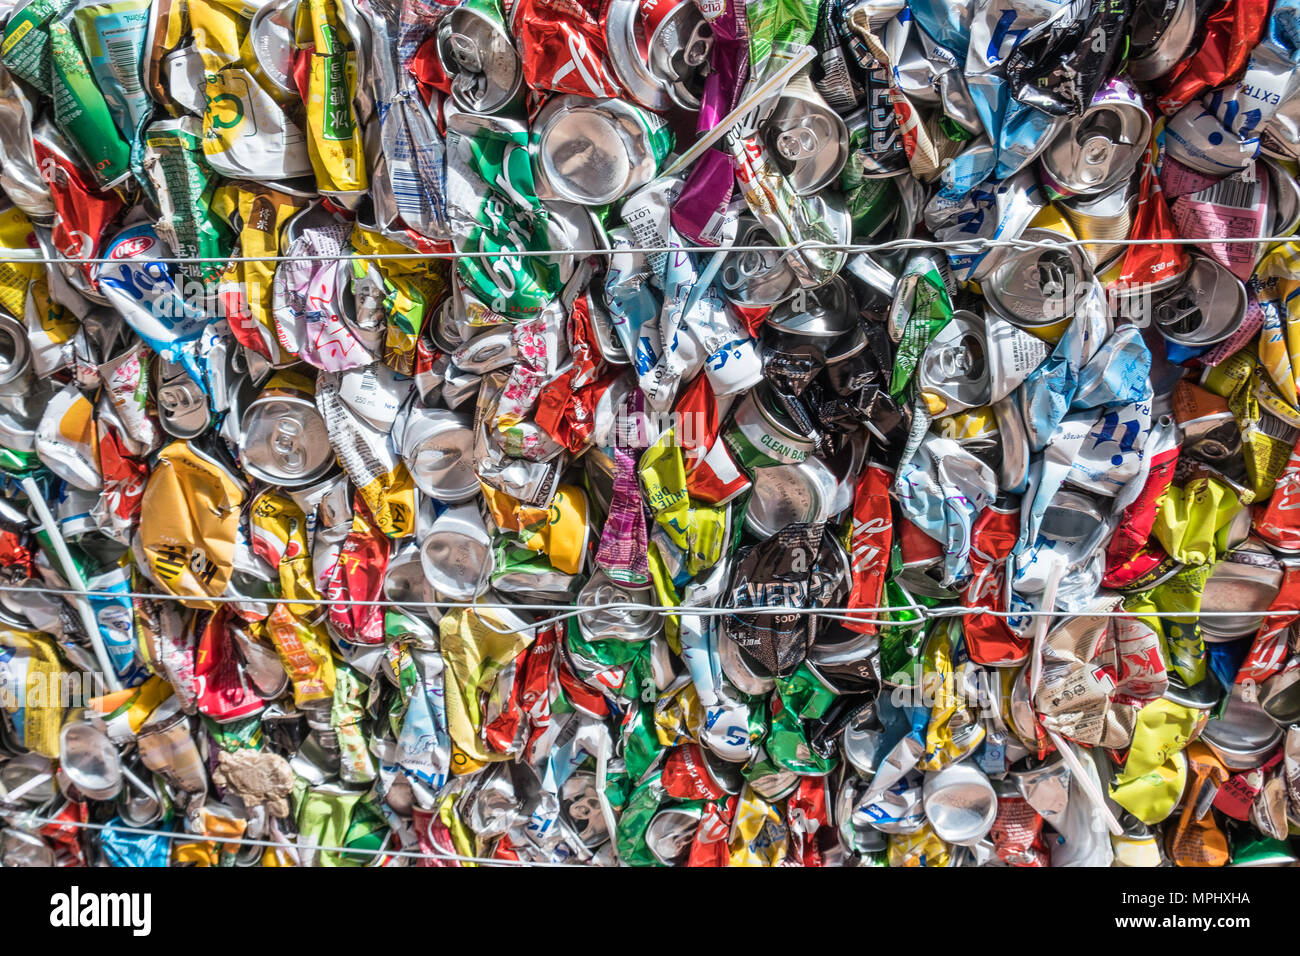 Squeezed aluminum beer and beverage cans prepared for transportation and processing pressed together into a cubic shape. Urban scene. Stock Photo